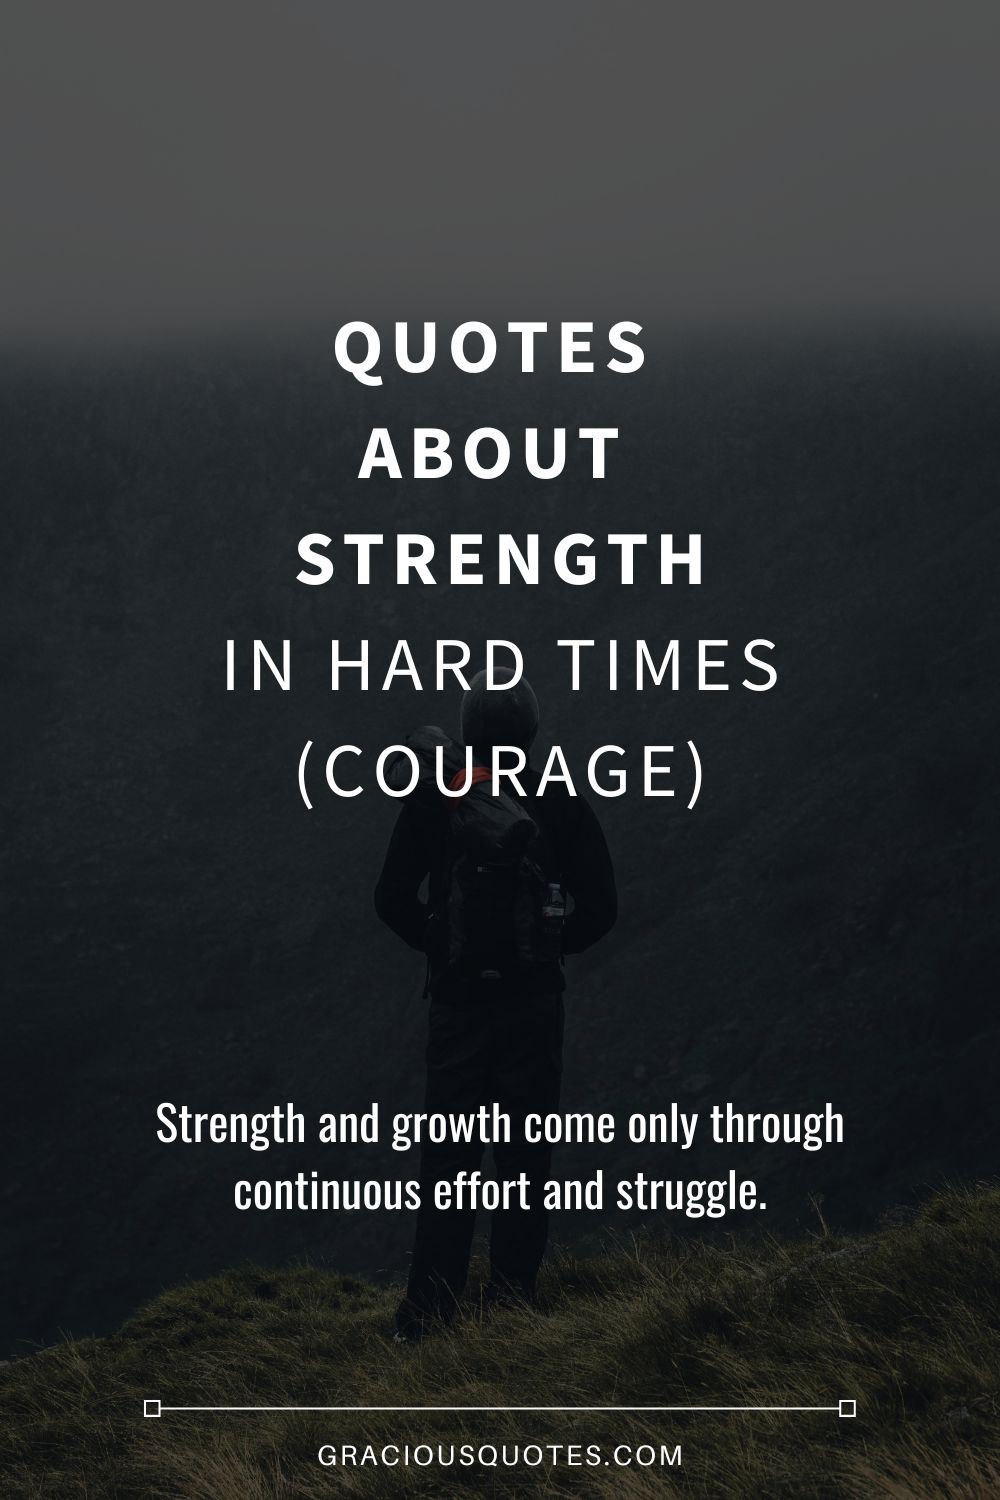 inspirational quotes about strength in hard times